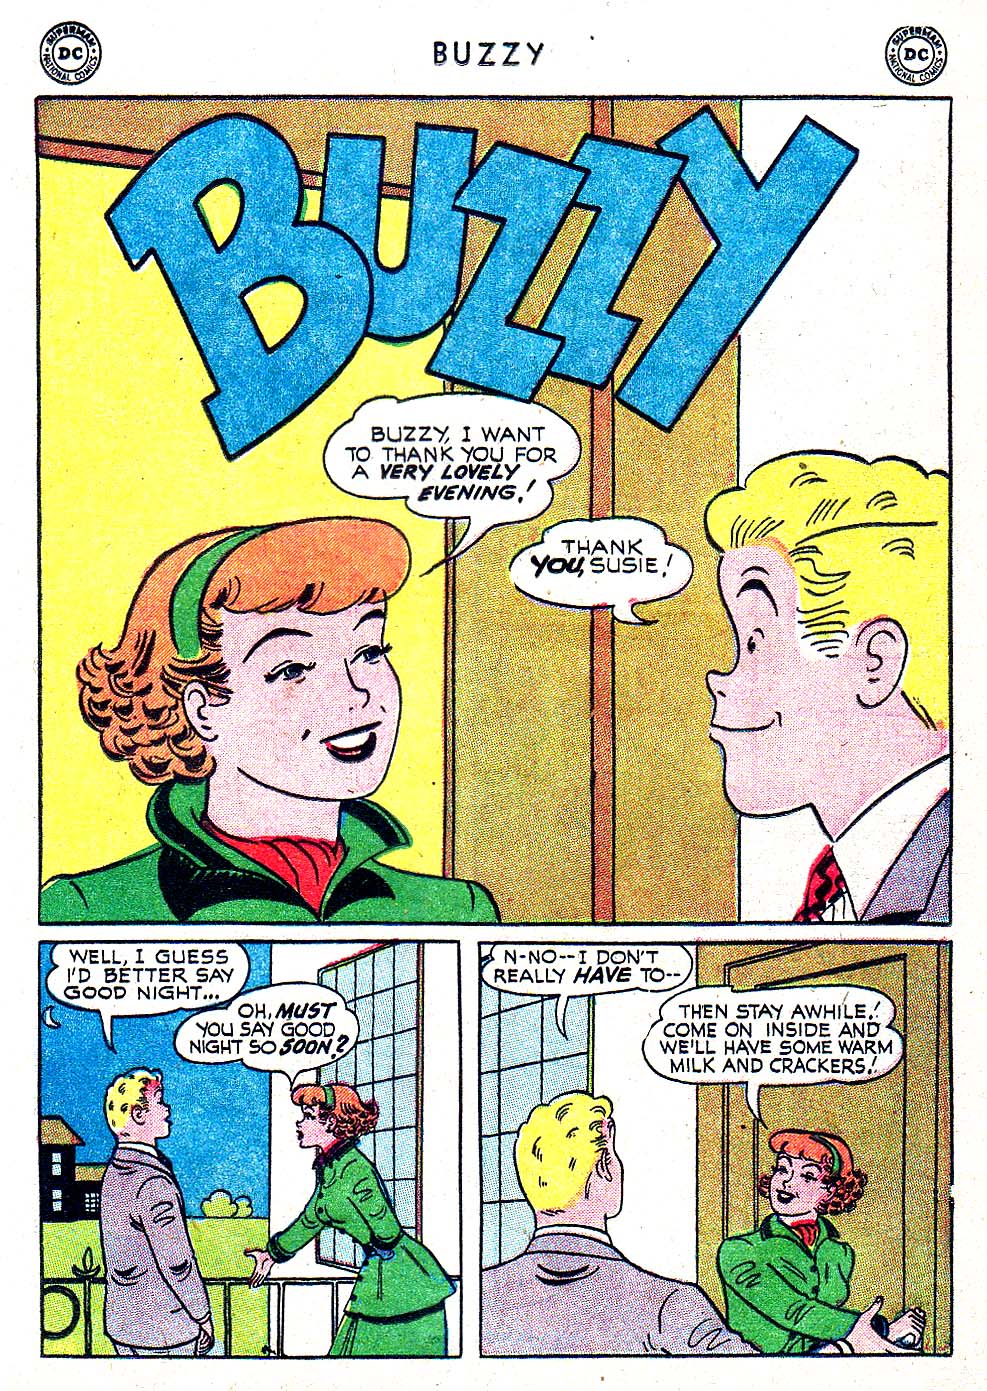 Read online Buzzy comic -  Issue #57 - 19